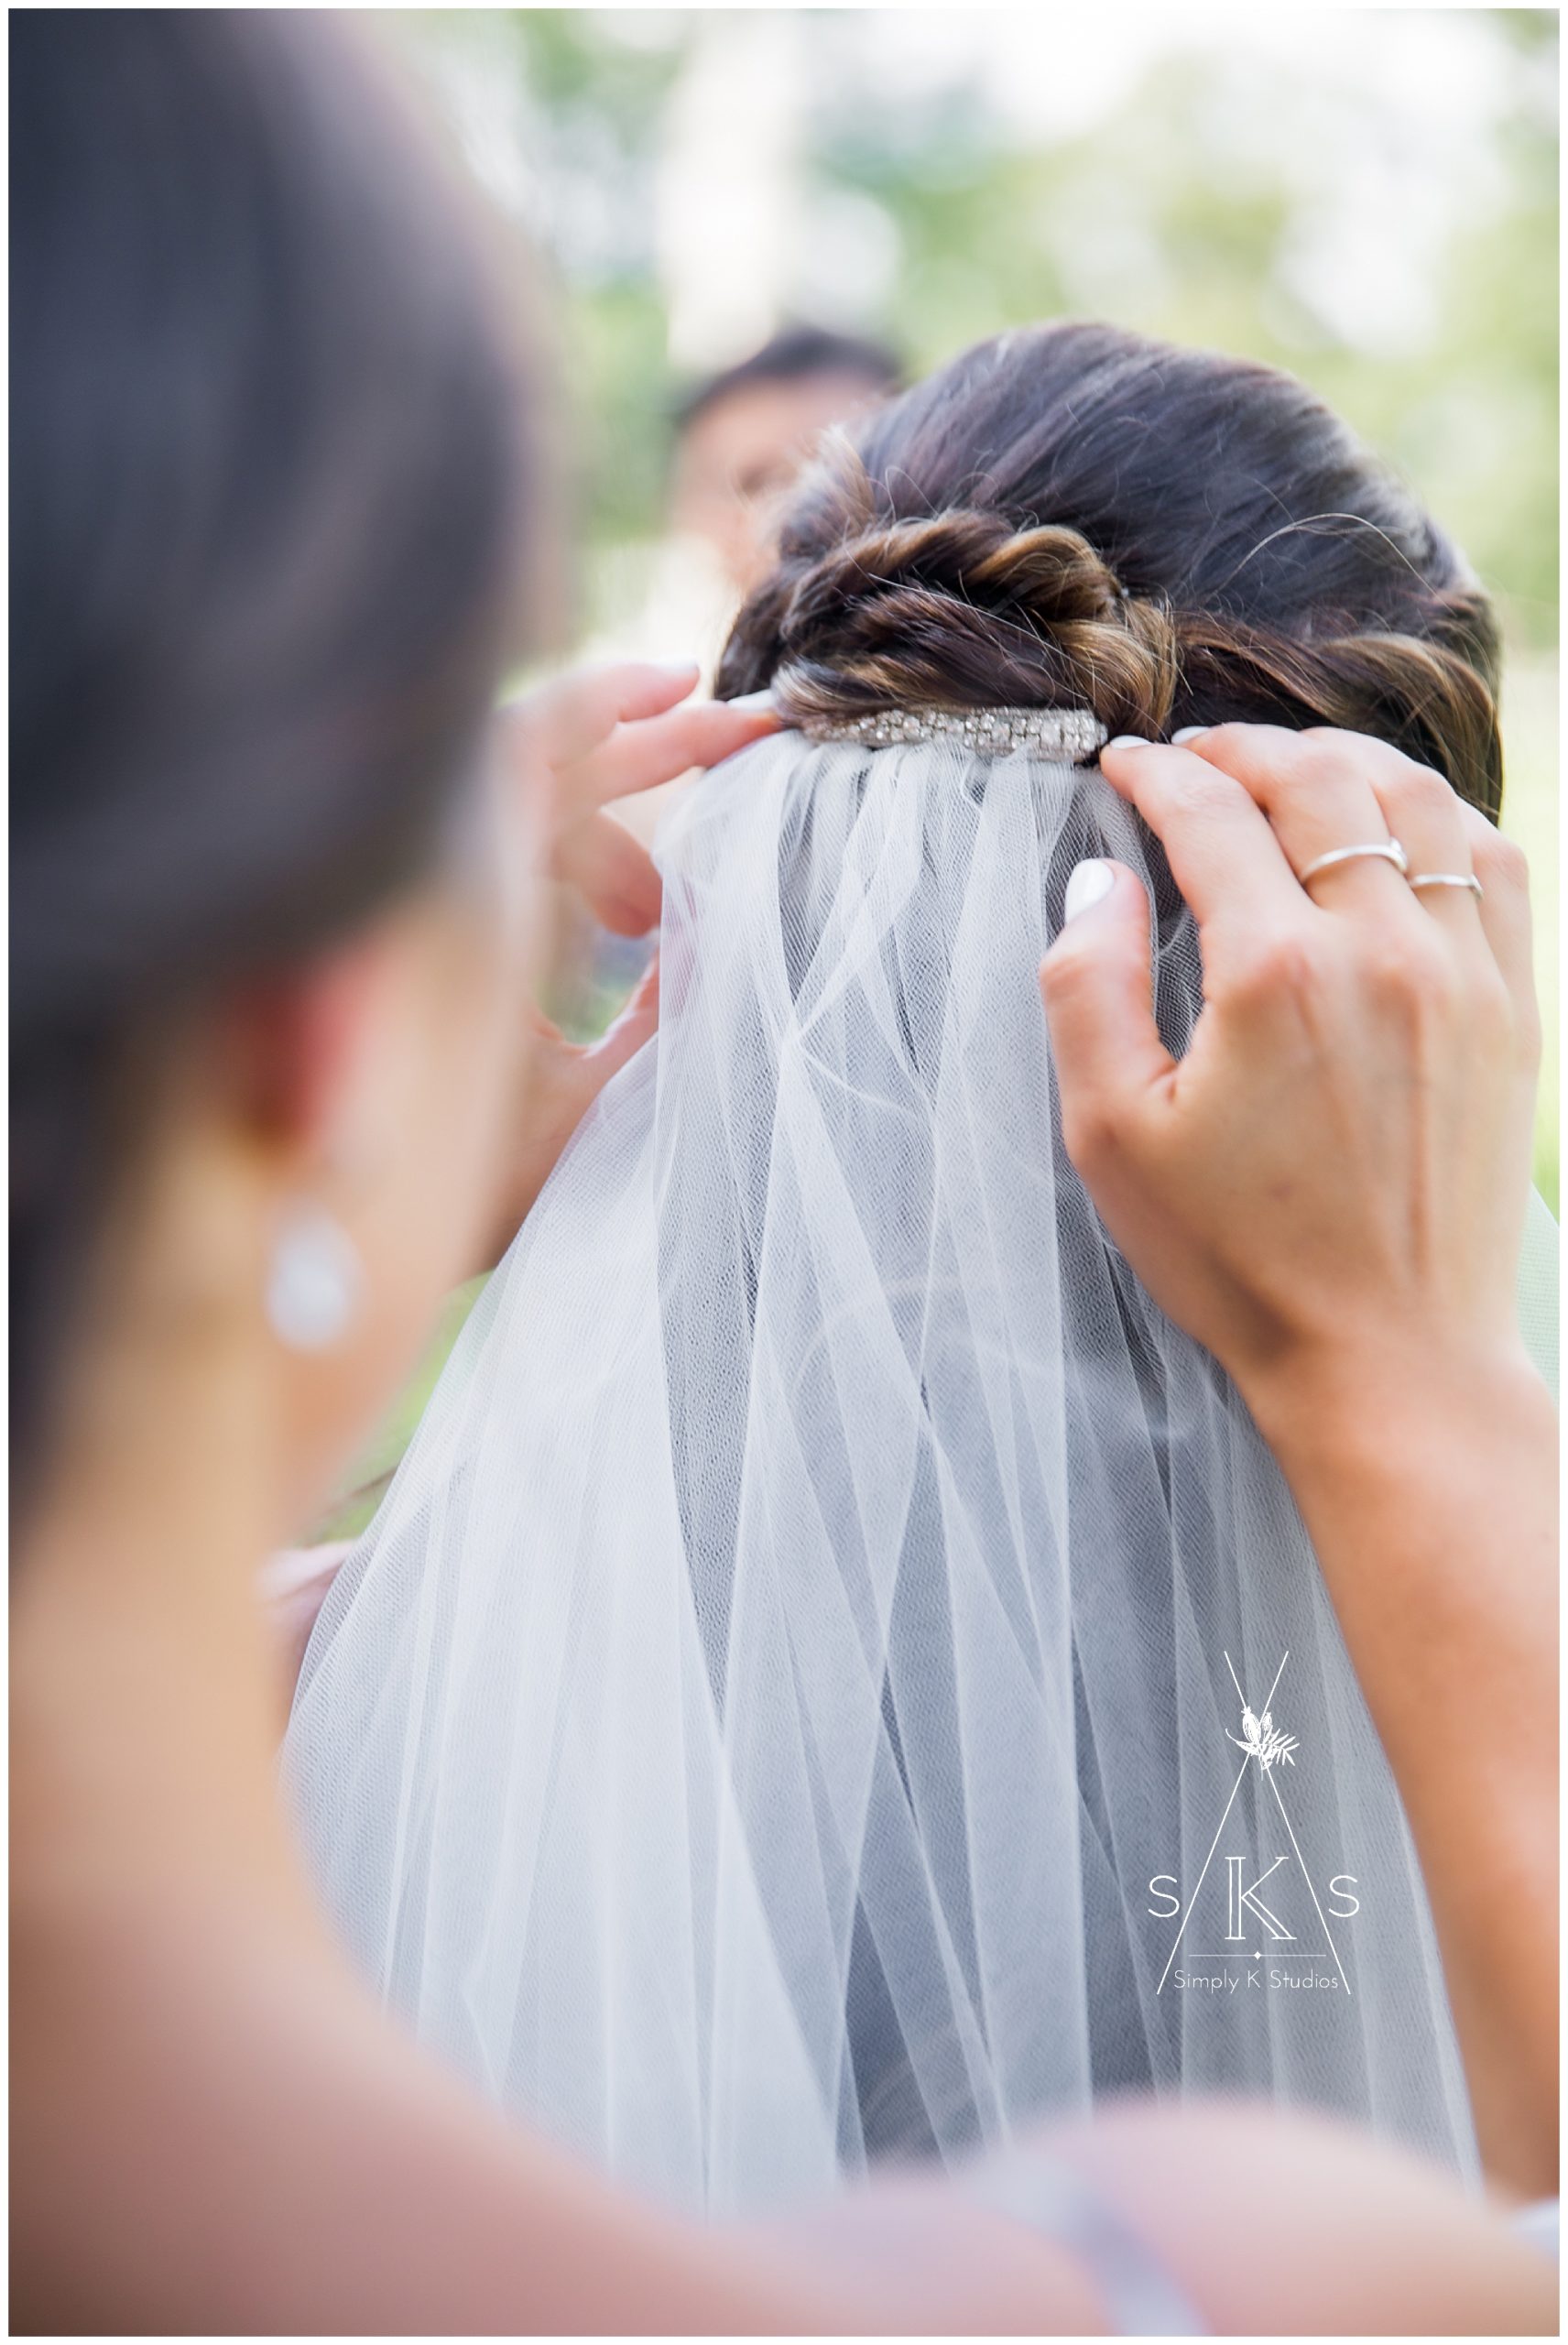  Veil for a wedding day 